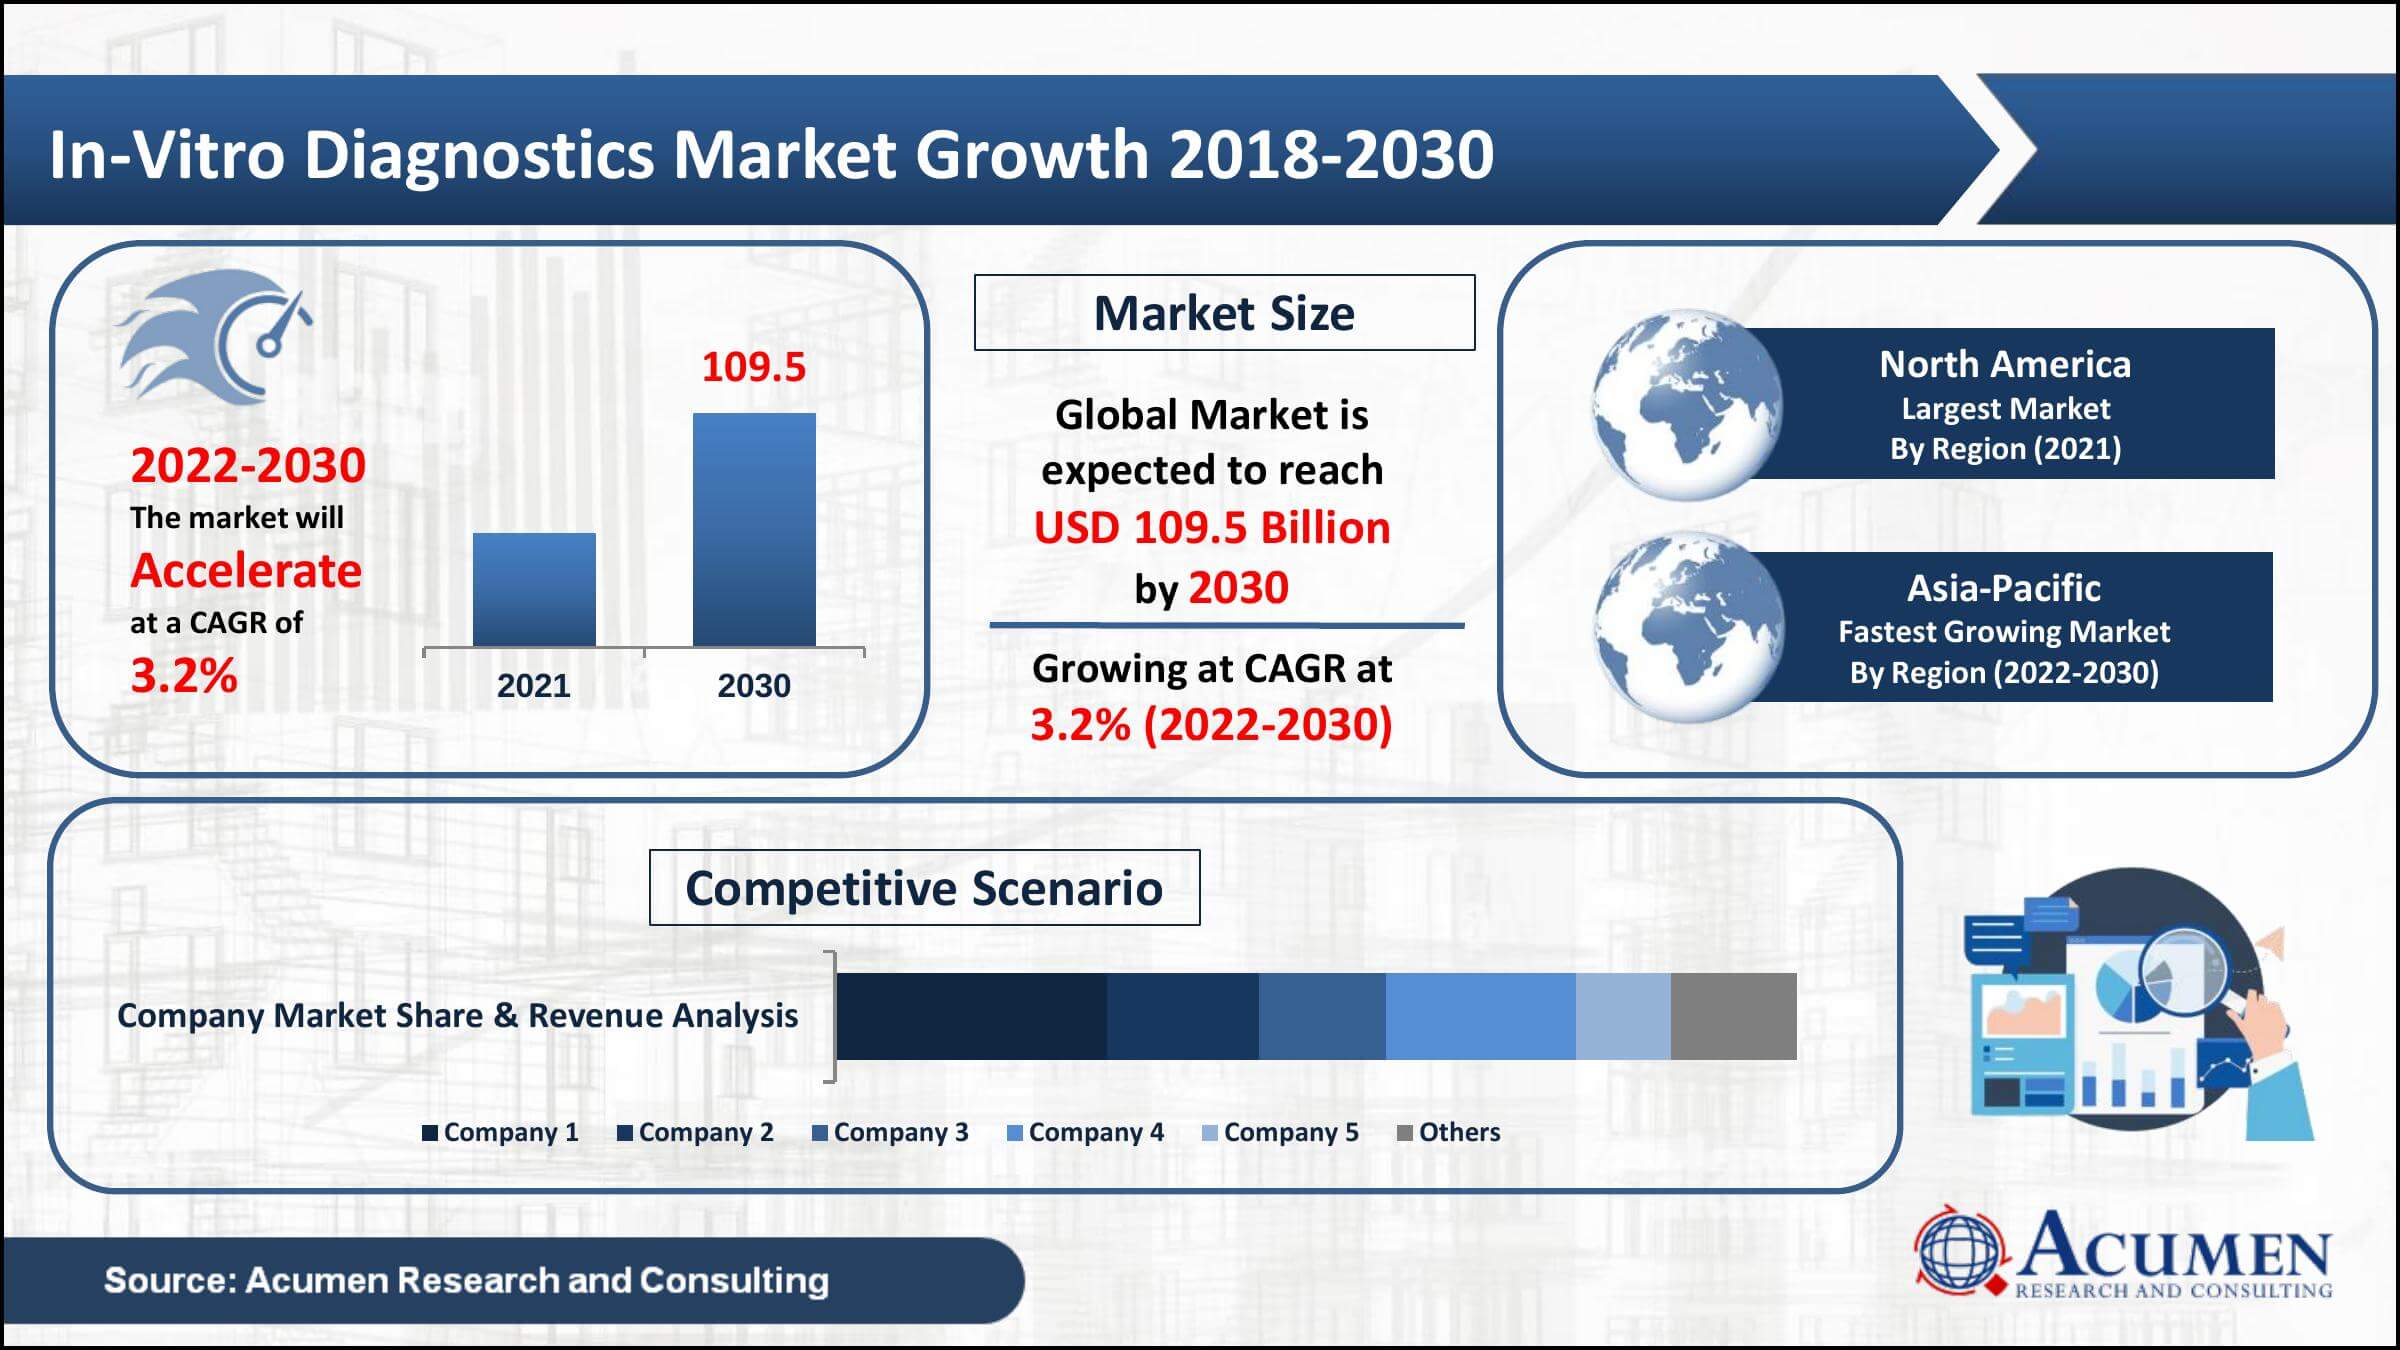 in-vitro diagnostics market revenue collected USD 83.3 Billion in 2021, with a 3.2% CAGR between 2022 and 2030